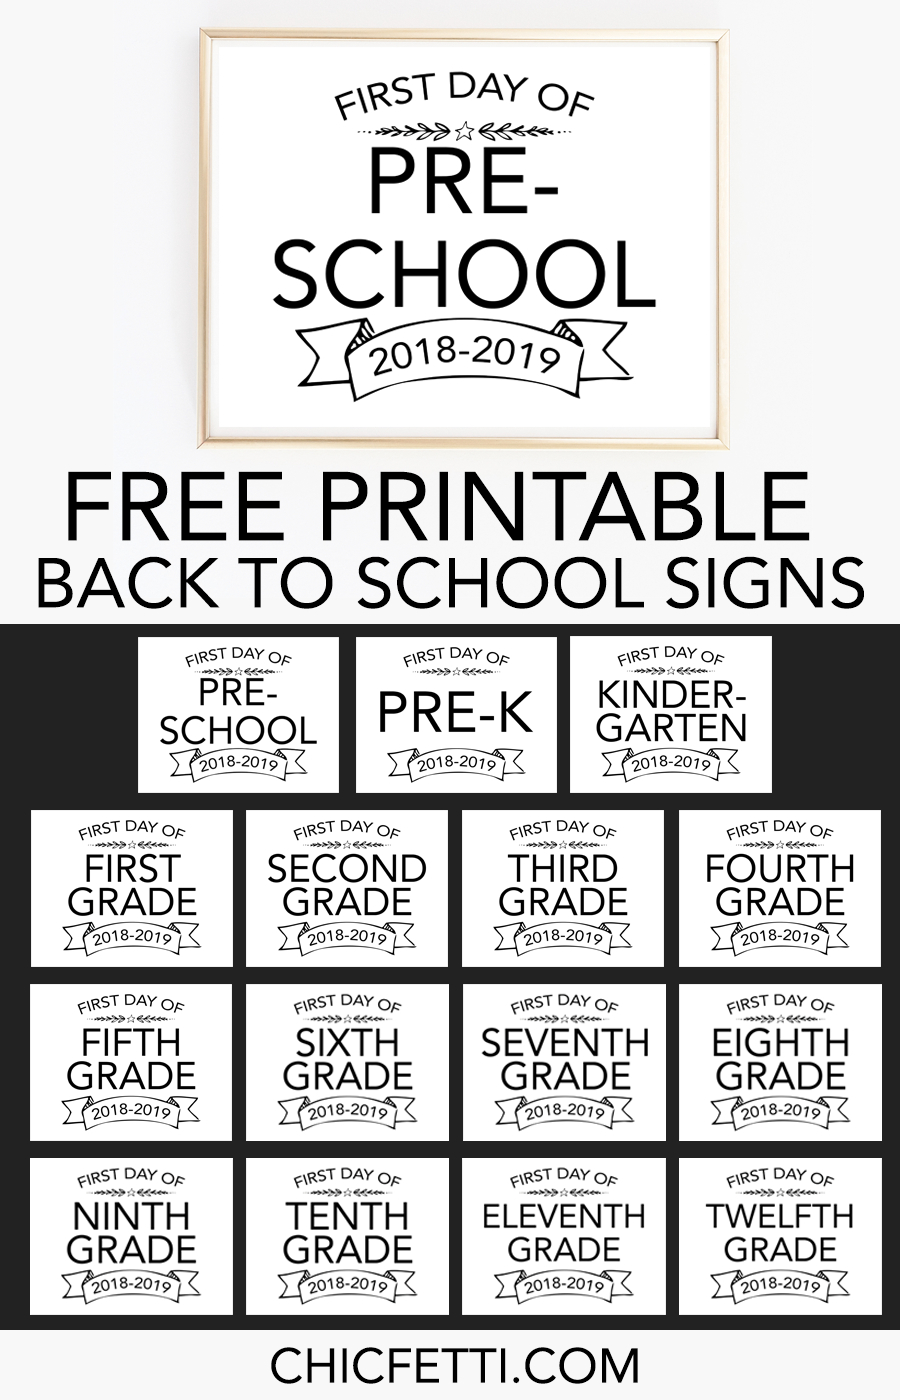 Printable Back To School Signs - Print Our Free First Day Of School - Free Printable Back To School